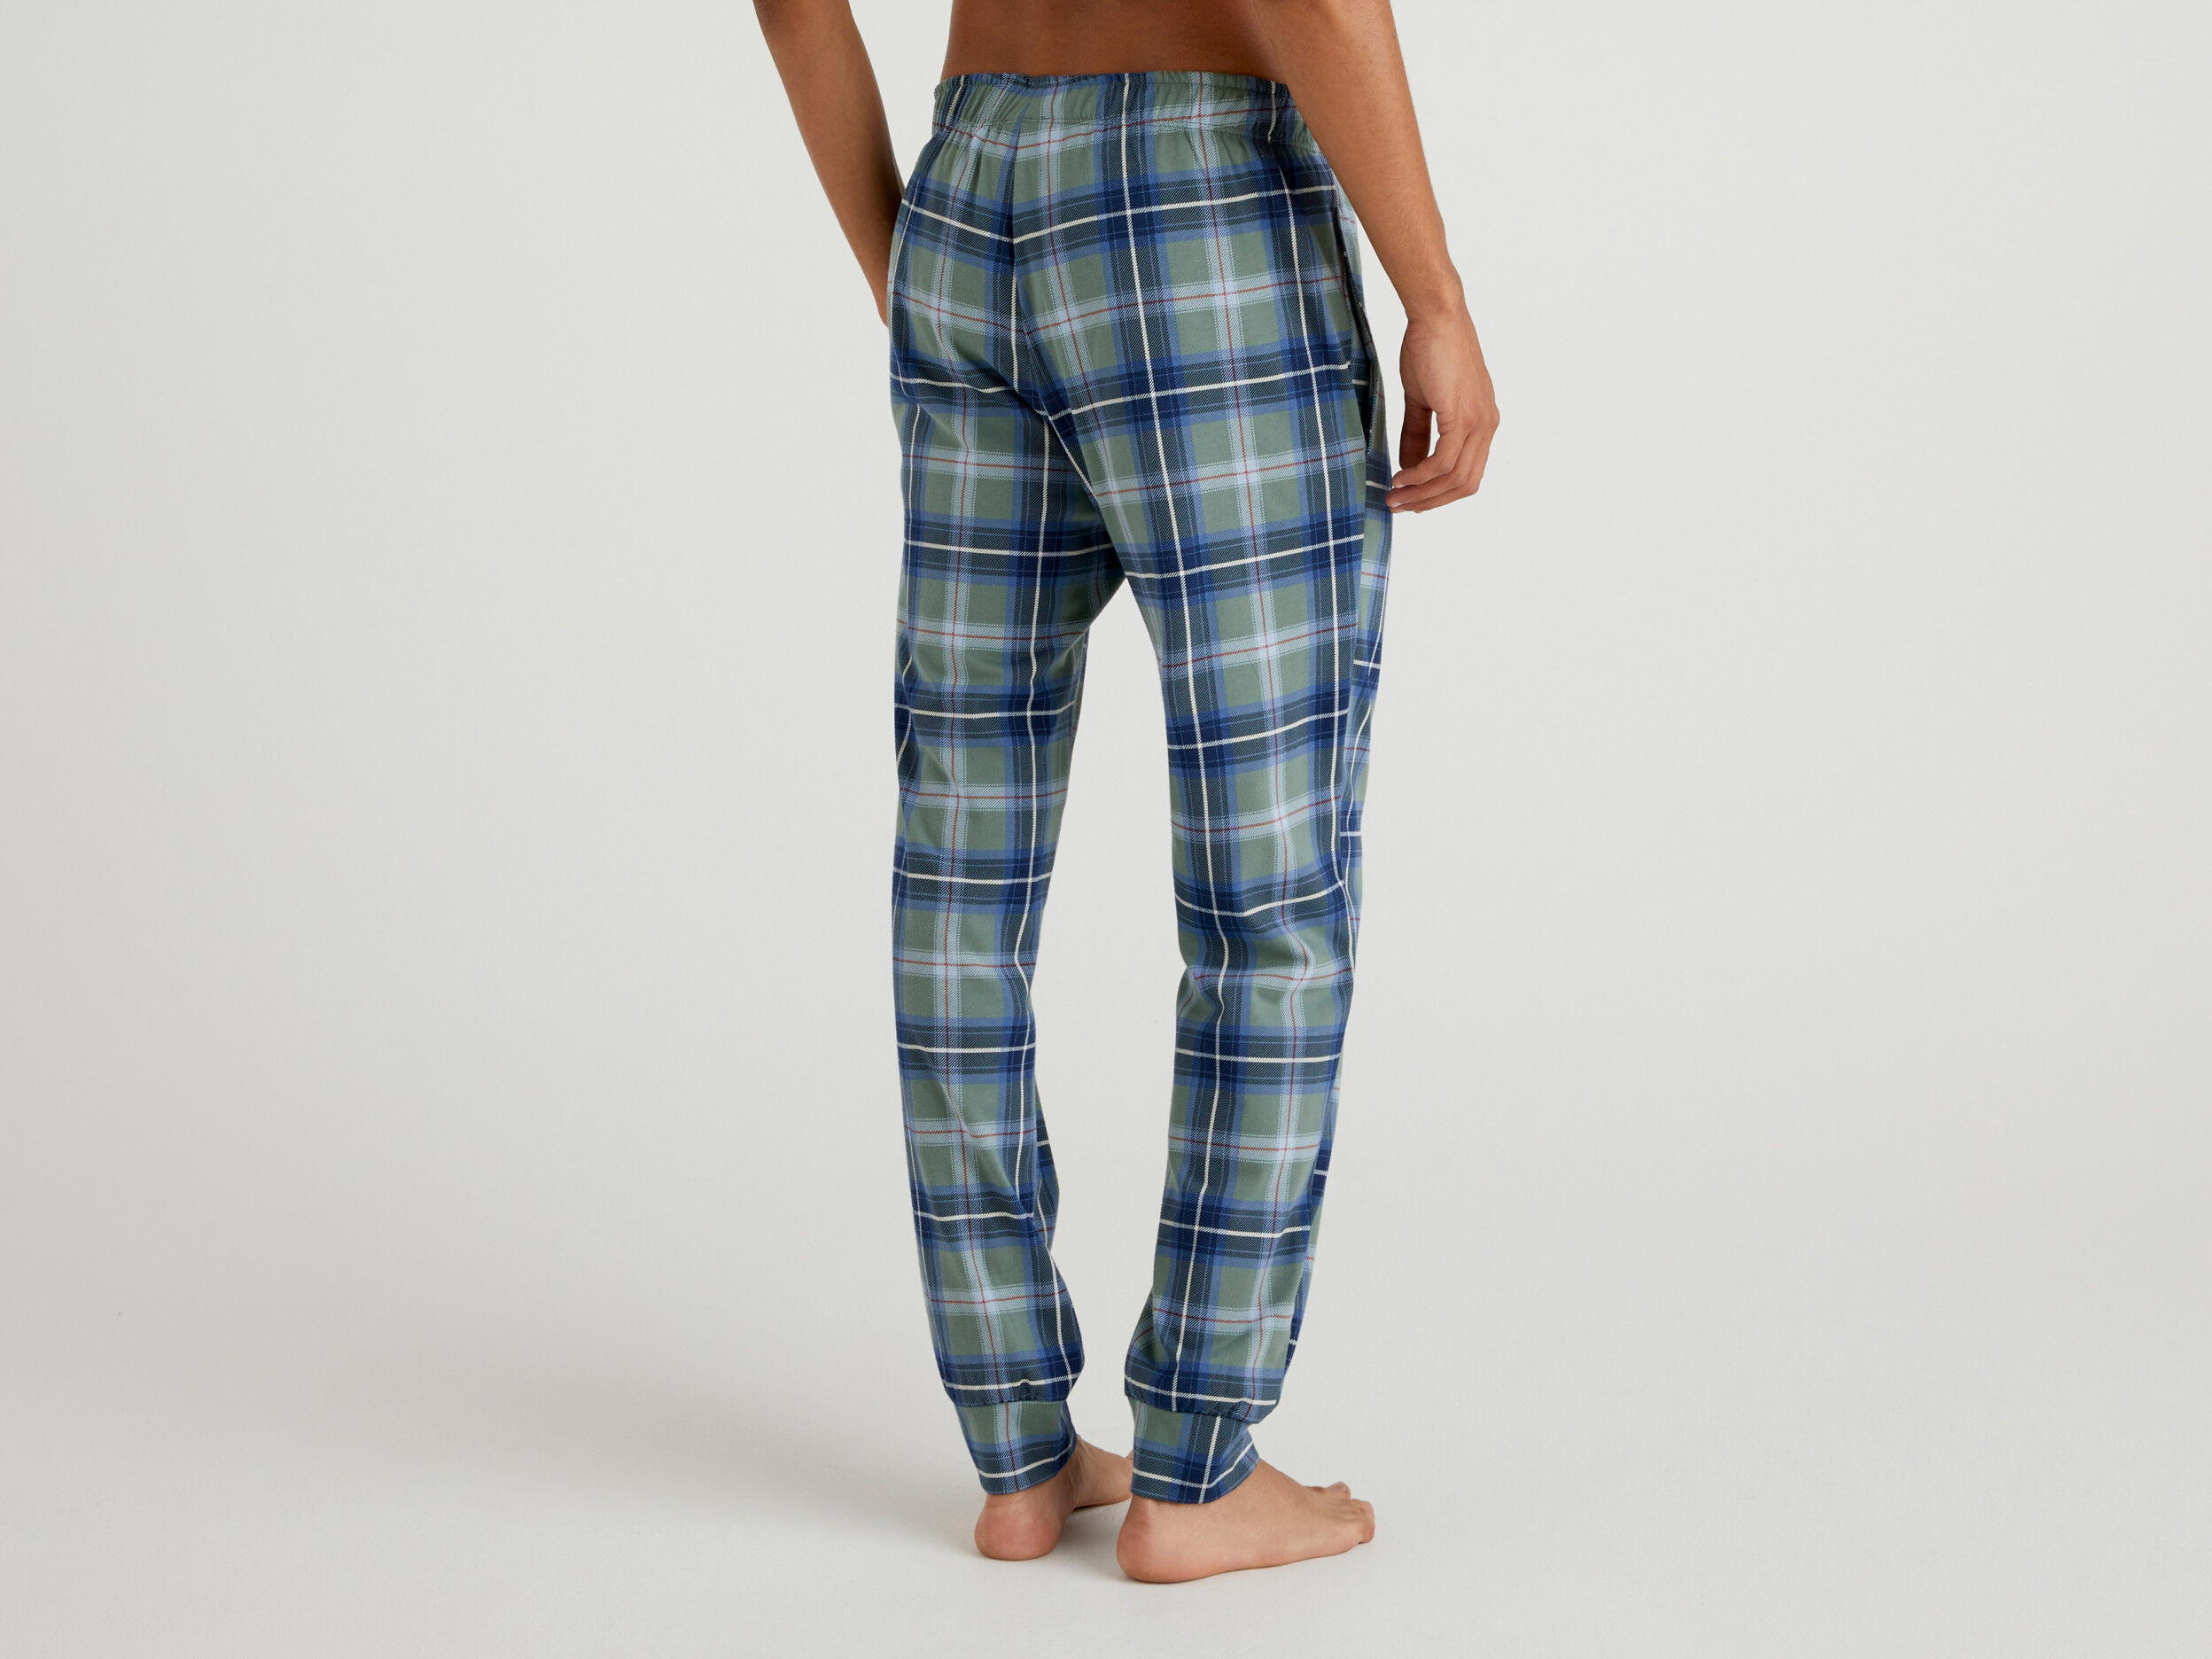 Rock Chick Check Trousers  Womens Trousers  Joe Browns